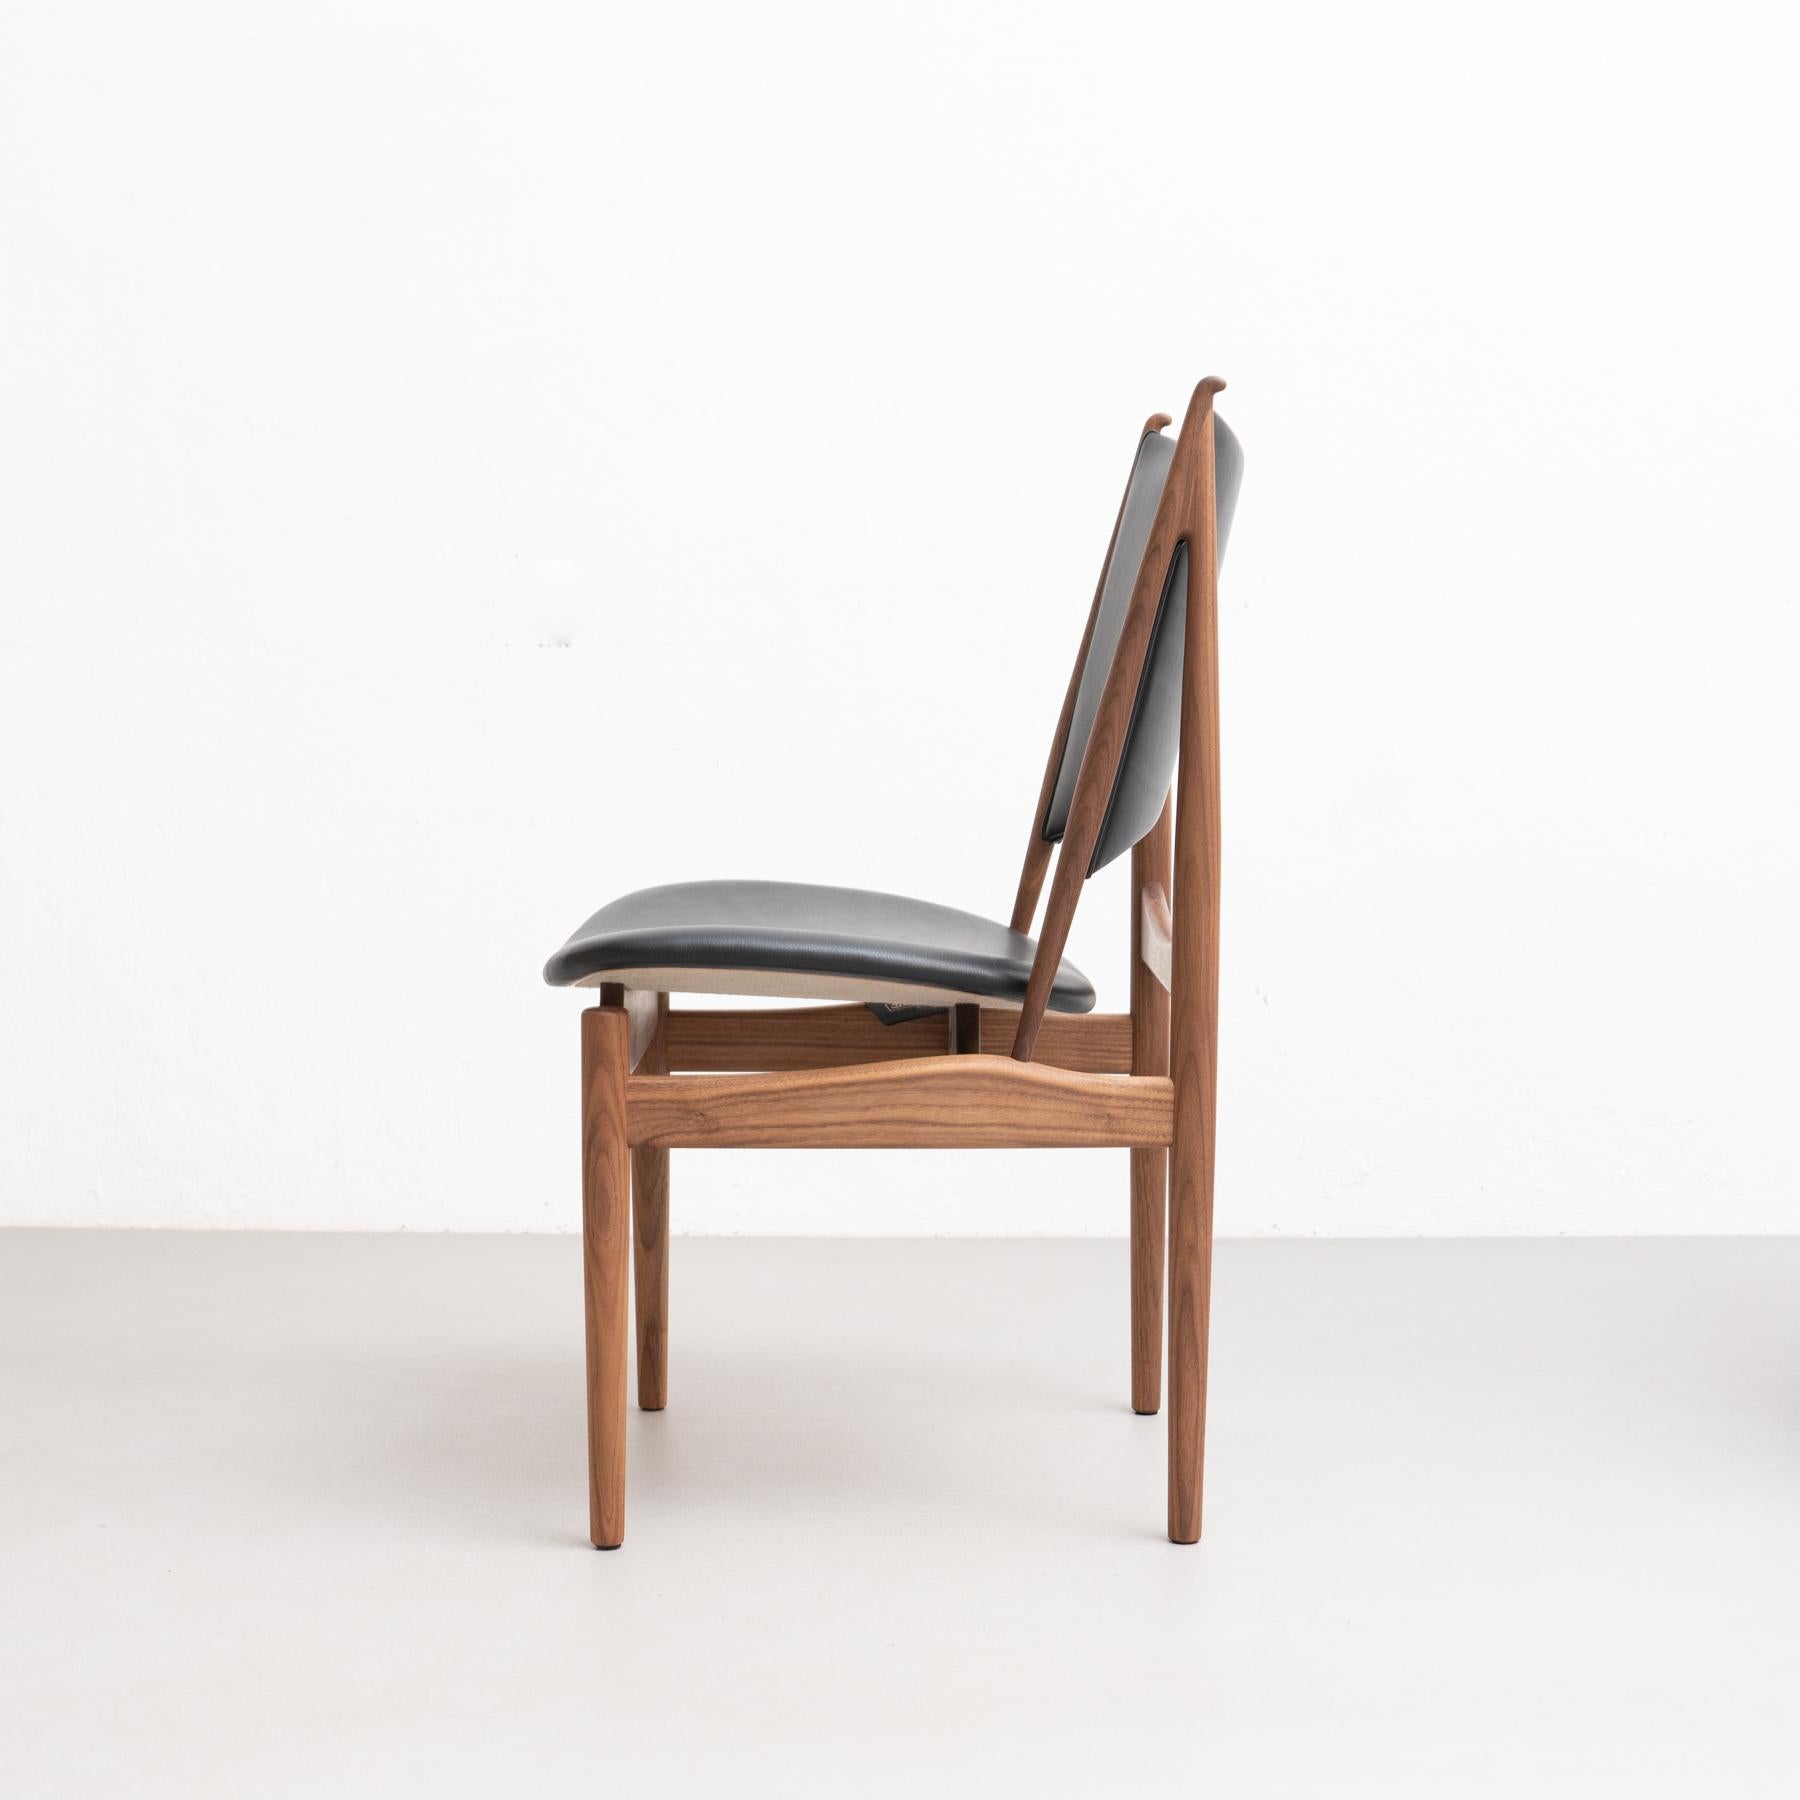 Contemporary Egyptian Armchair in Wood and Leather, by Finn Juhl